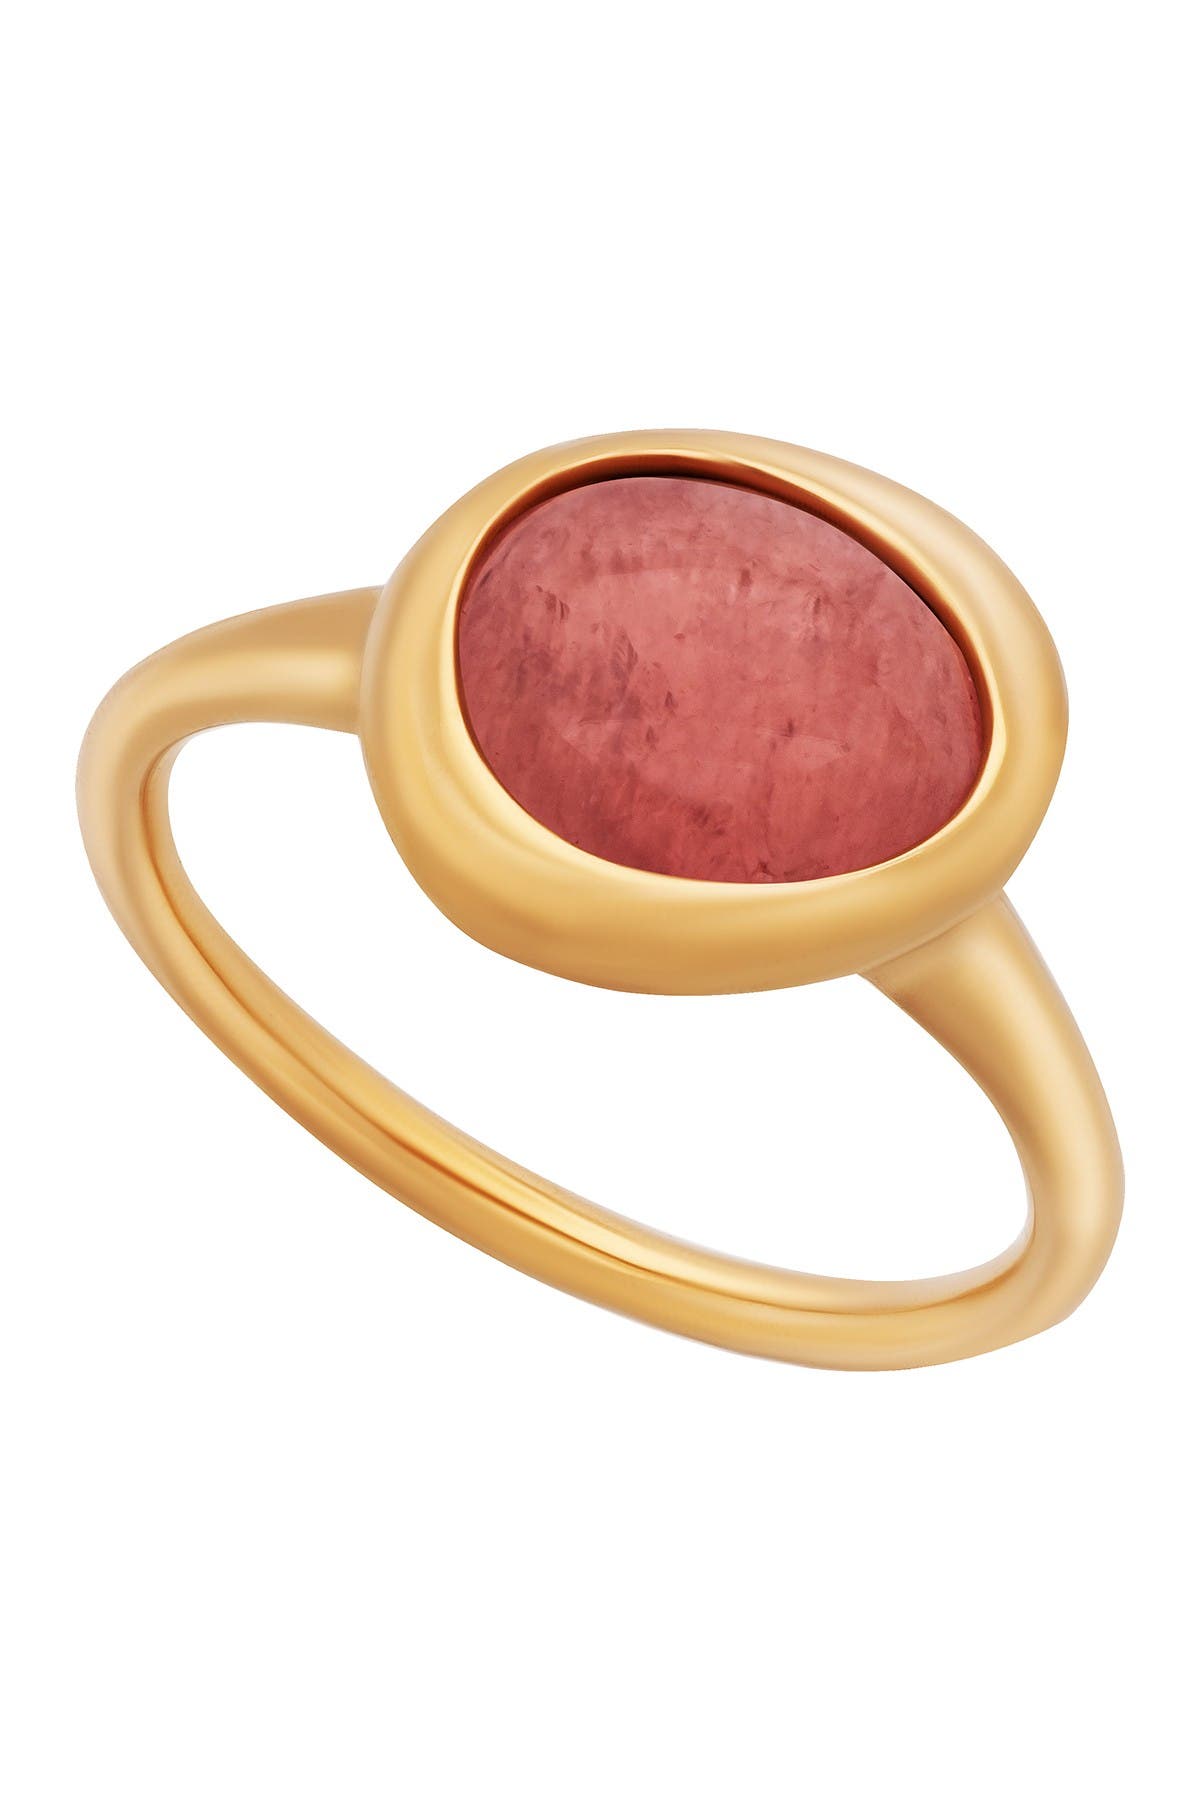 Fred Of Paris Rose Gold Rhodochrosite Ring In Bright Pink